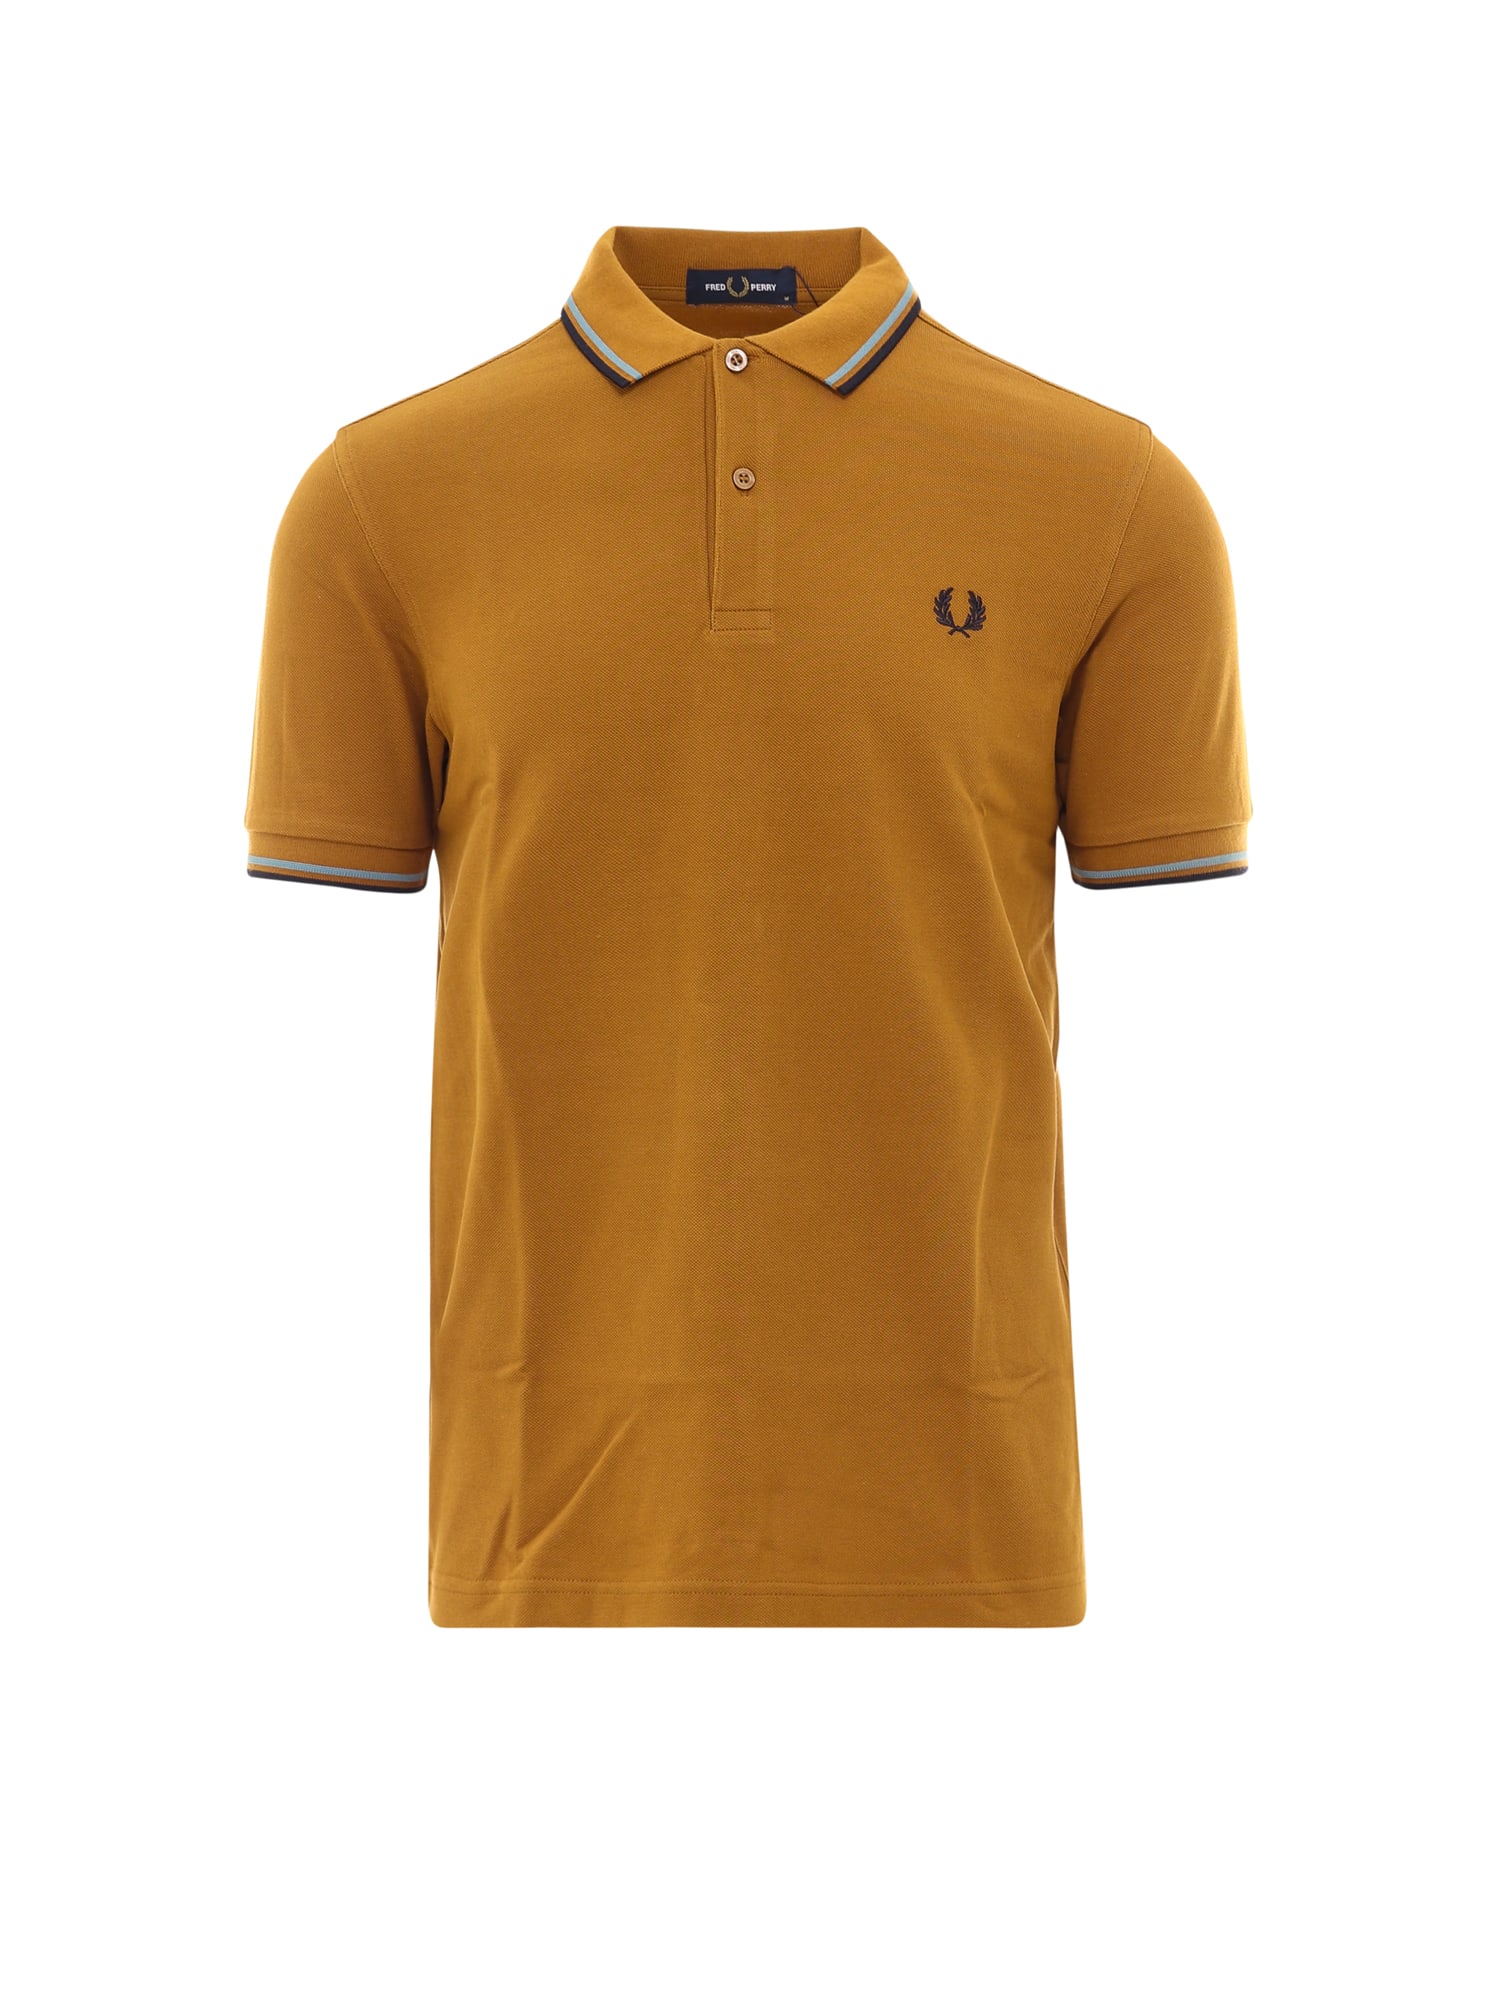 FRED PERRY POLO SHIRT,FPM360037 644